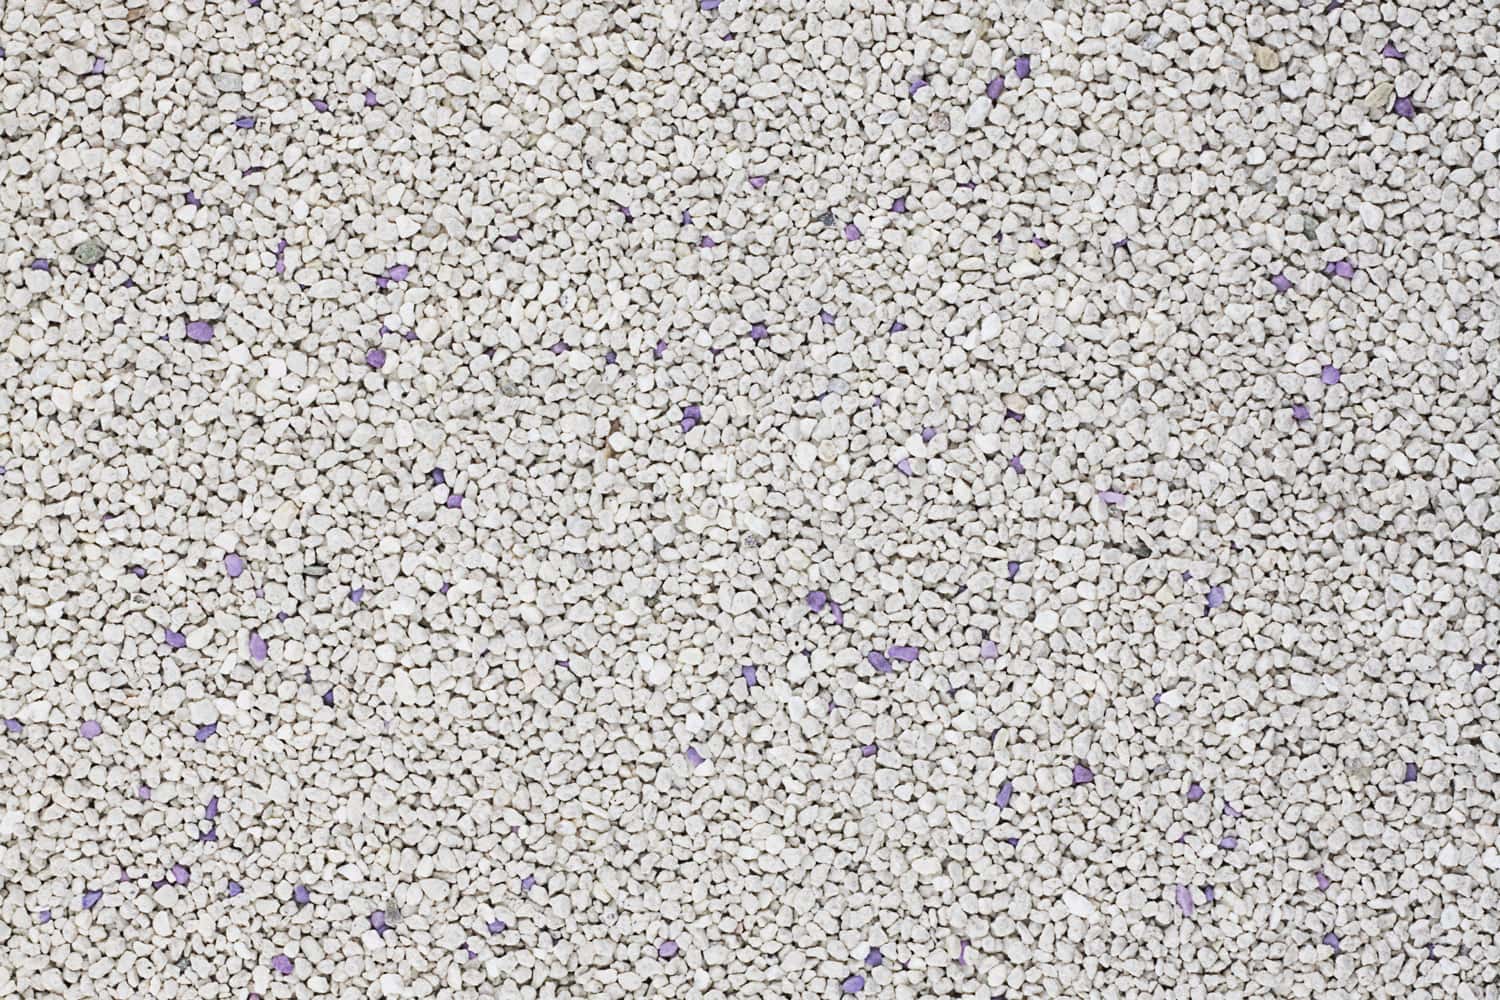 Cat litter with purple particels for lavender scent Can be used as product photo or cat littler packaging mock up element Pebble texture - world's best litter in the litter-robot